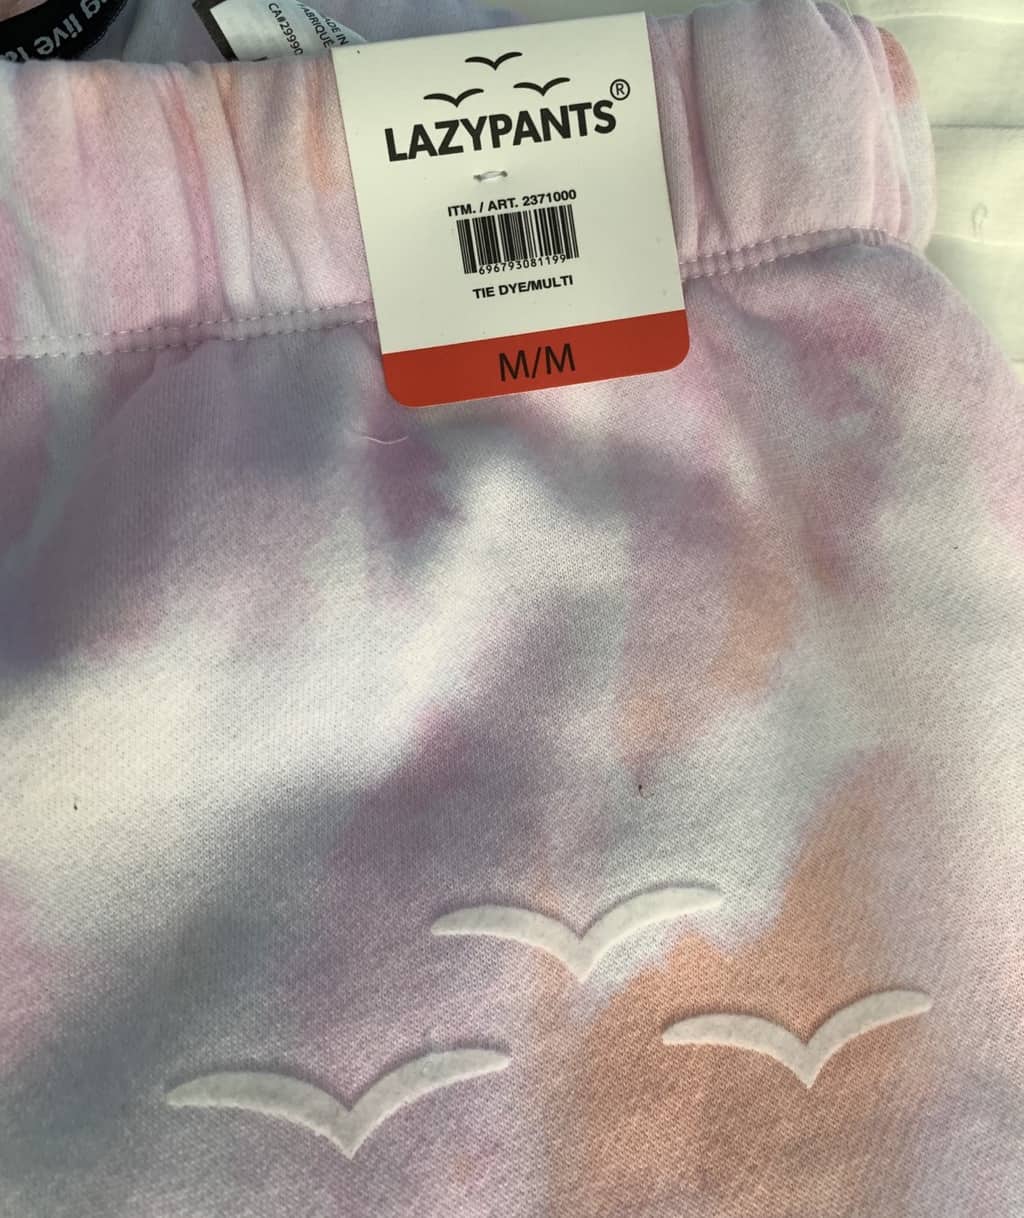 Costco LazyPants Hoodie & Joggers Review - Costcuisine